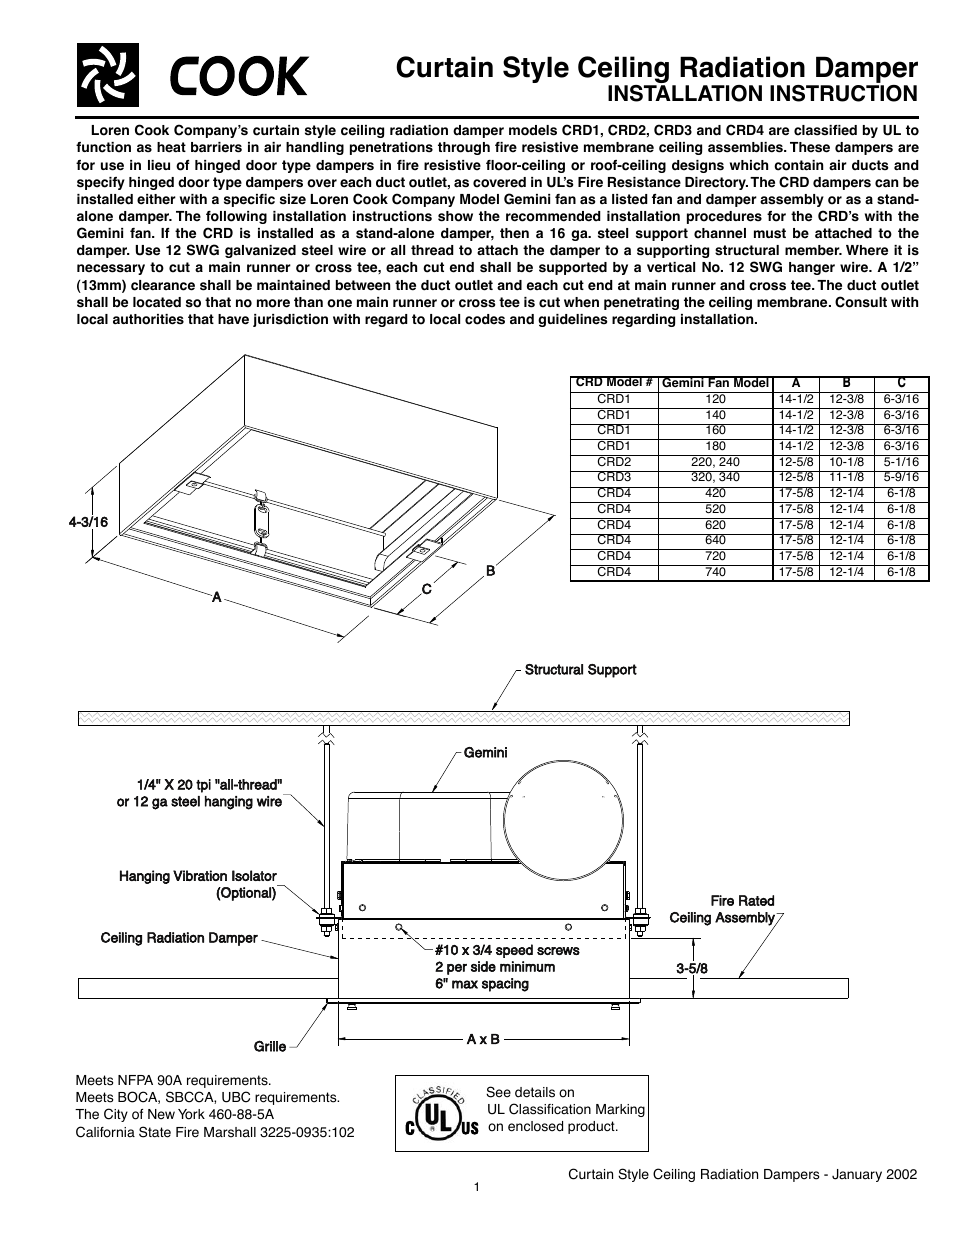 Curtain Style Ceiling Radiation Damper